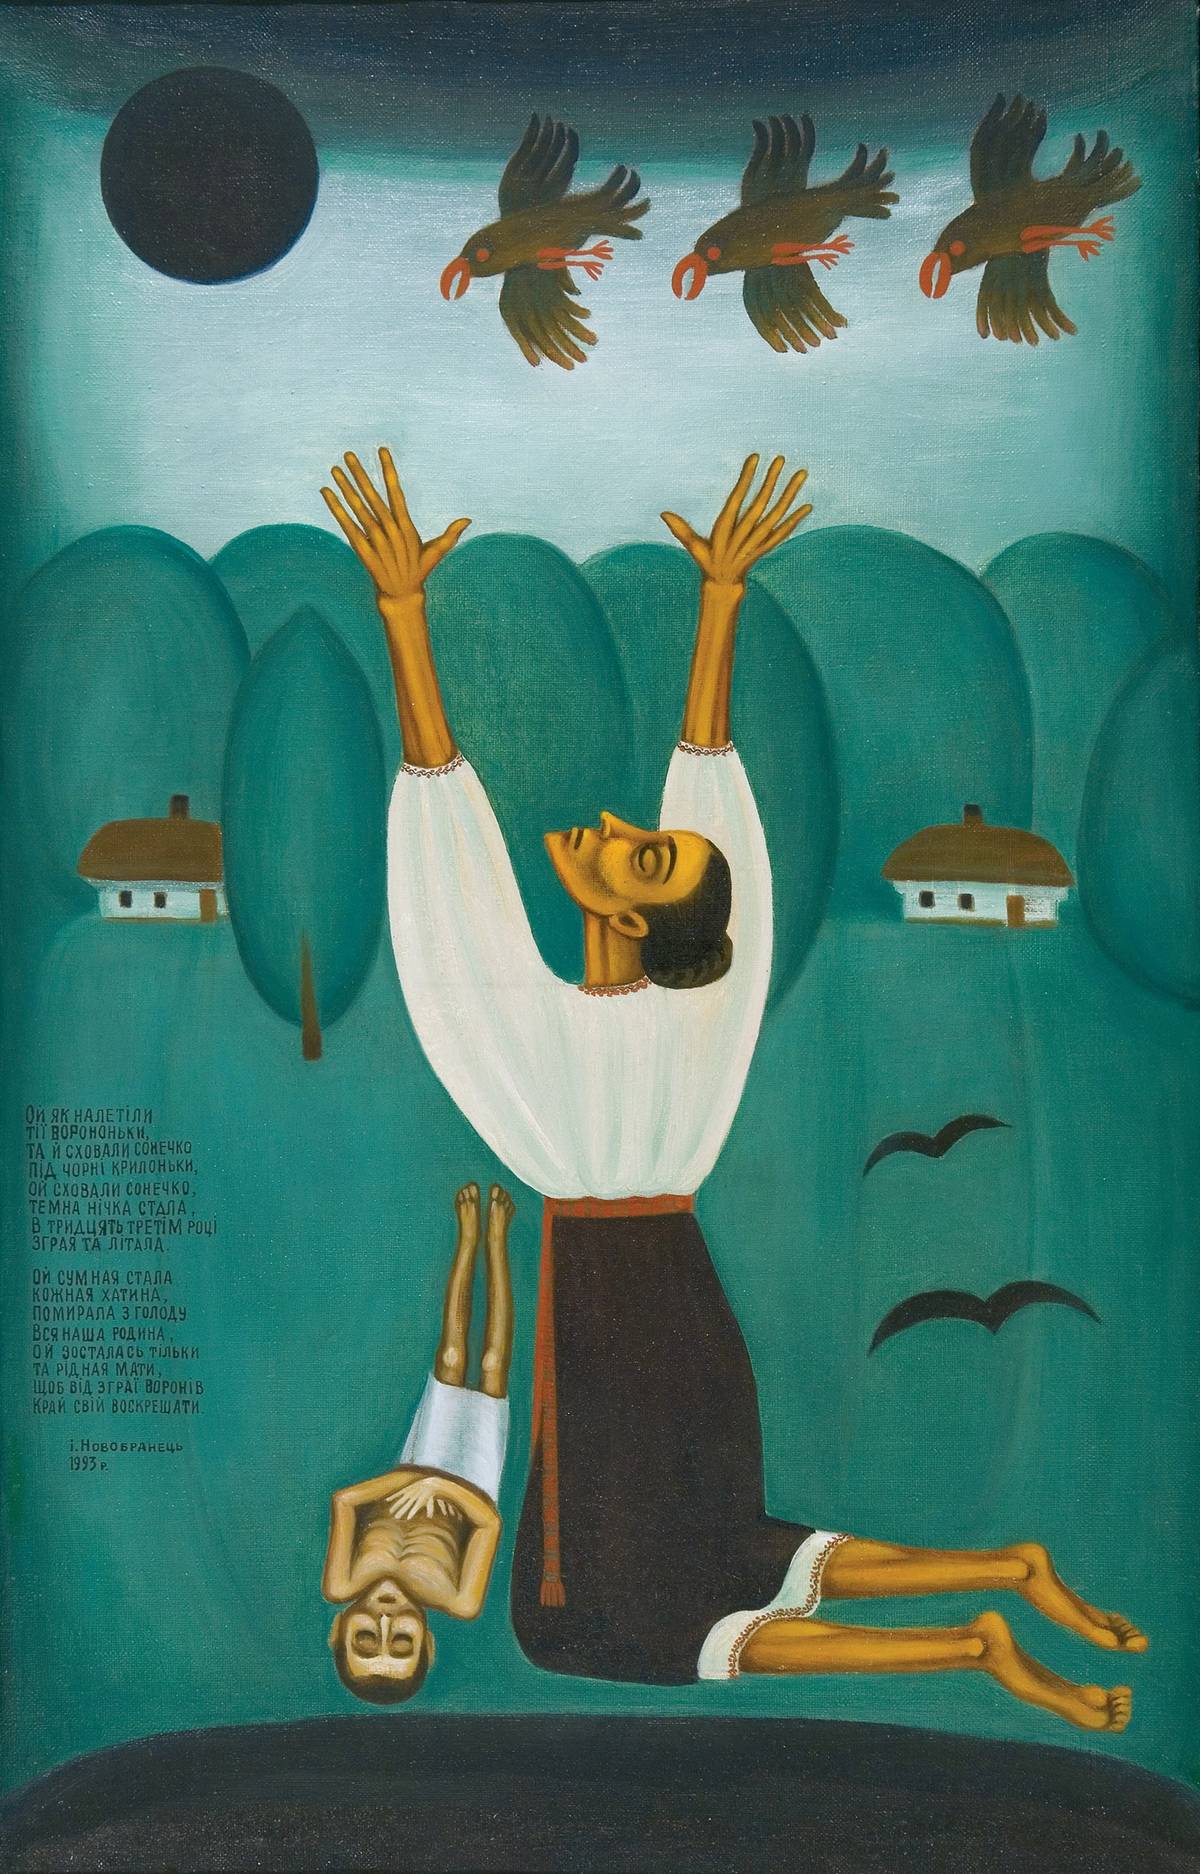 'Oh, Those Crows Swooped Down,' by Ivan Novobranets, 1988, right side of a triptych commemorating the Holodomor made by the graphic artist and painter in Poltava, Ukraine. The work is part of Morgan Williams' collection of artistic representations of the period of forced starvation.